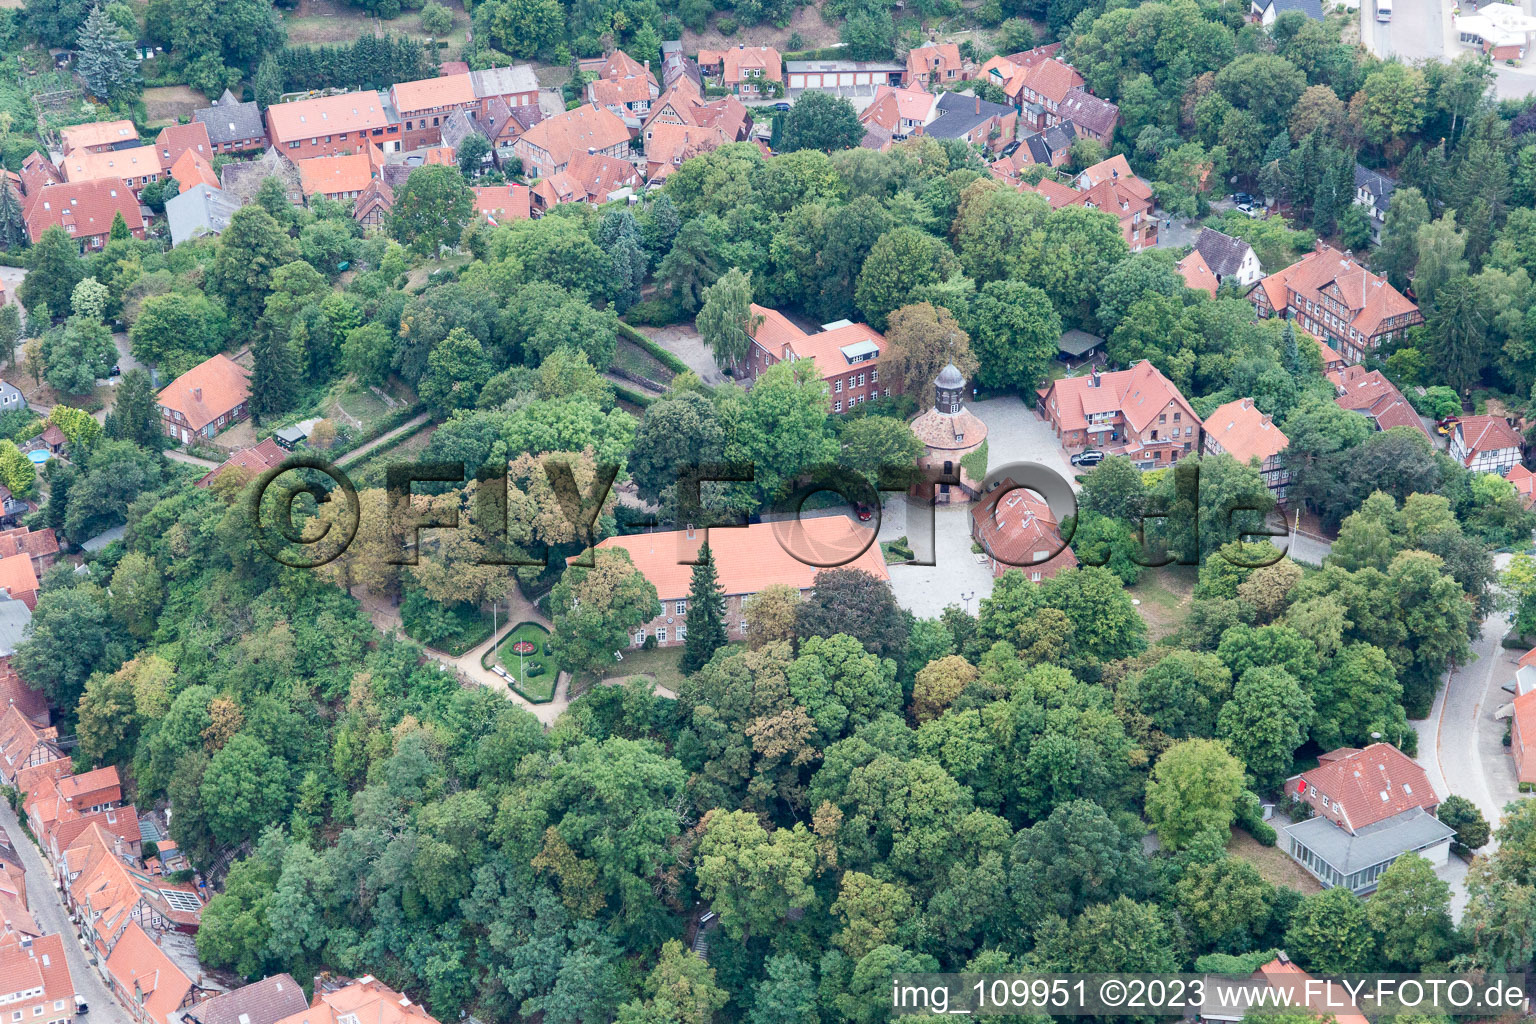 Aerial view of Lauenburg in the state Schleswig Holstein, Germany